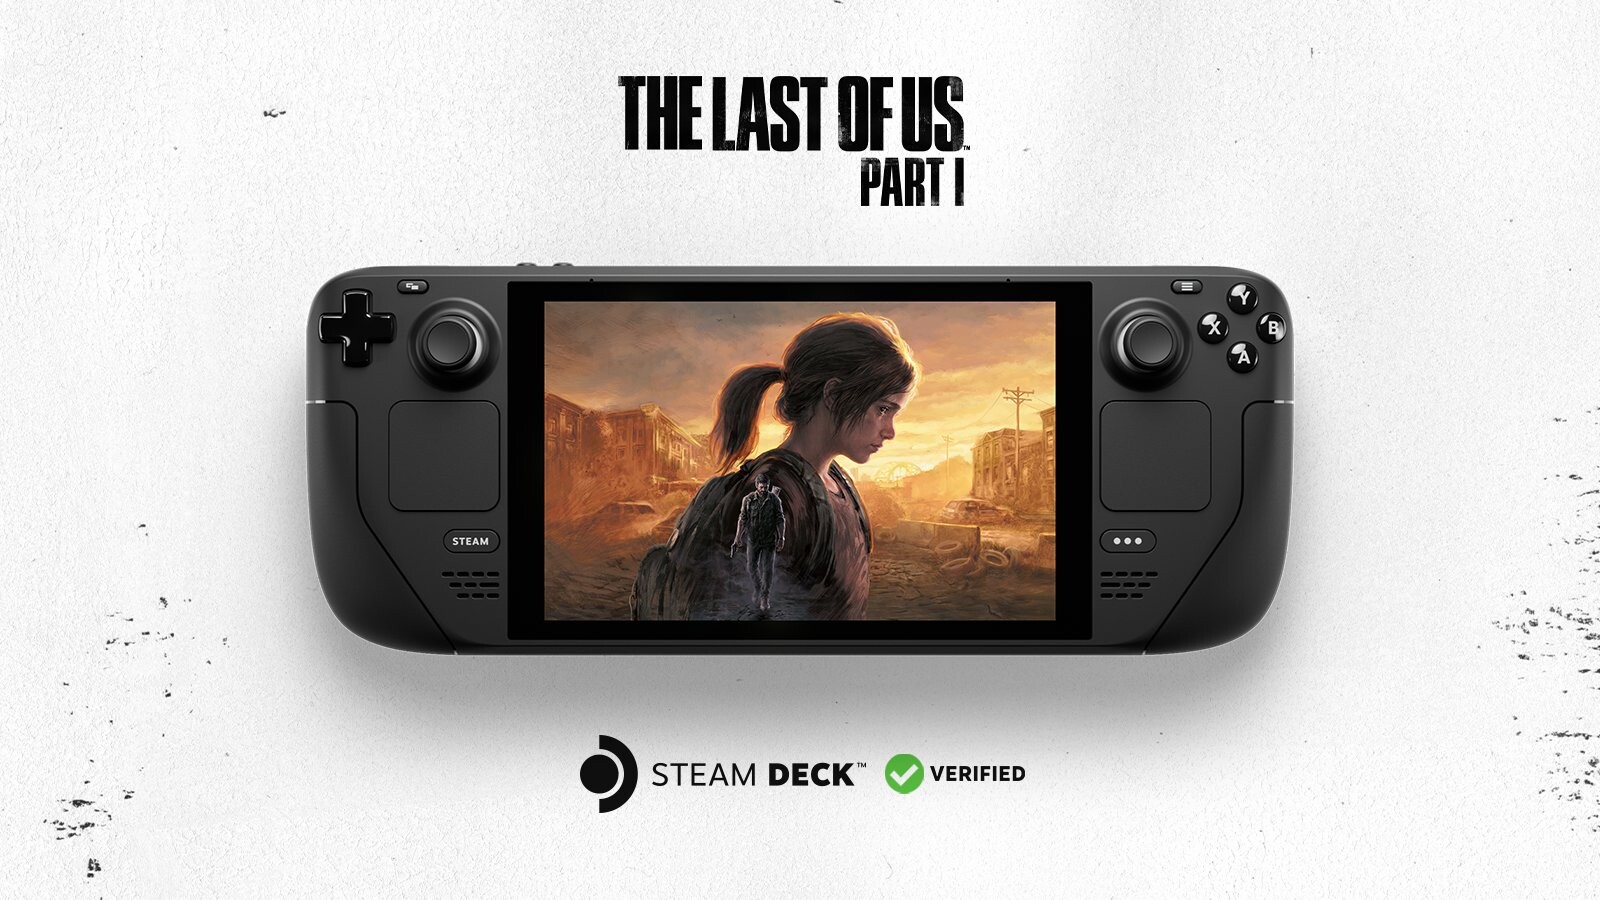 THE LAST OF US - Steam Deck gameplay, Steam OS